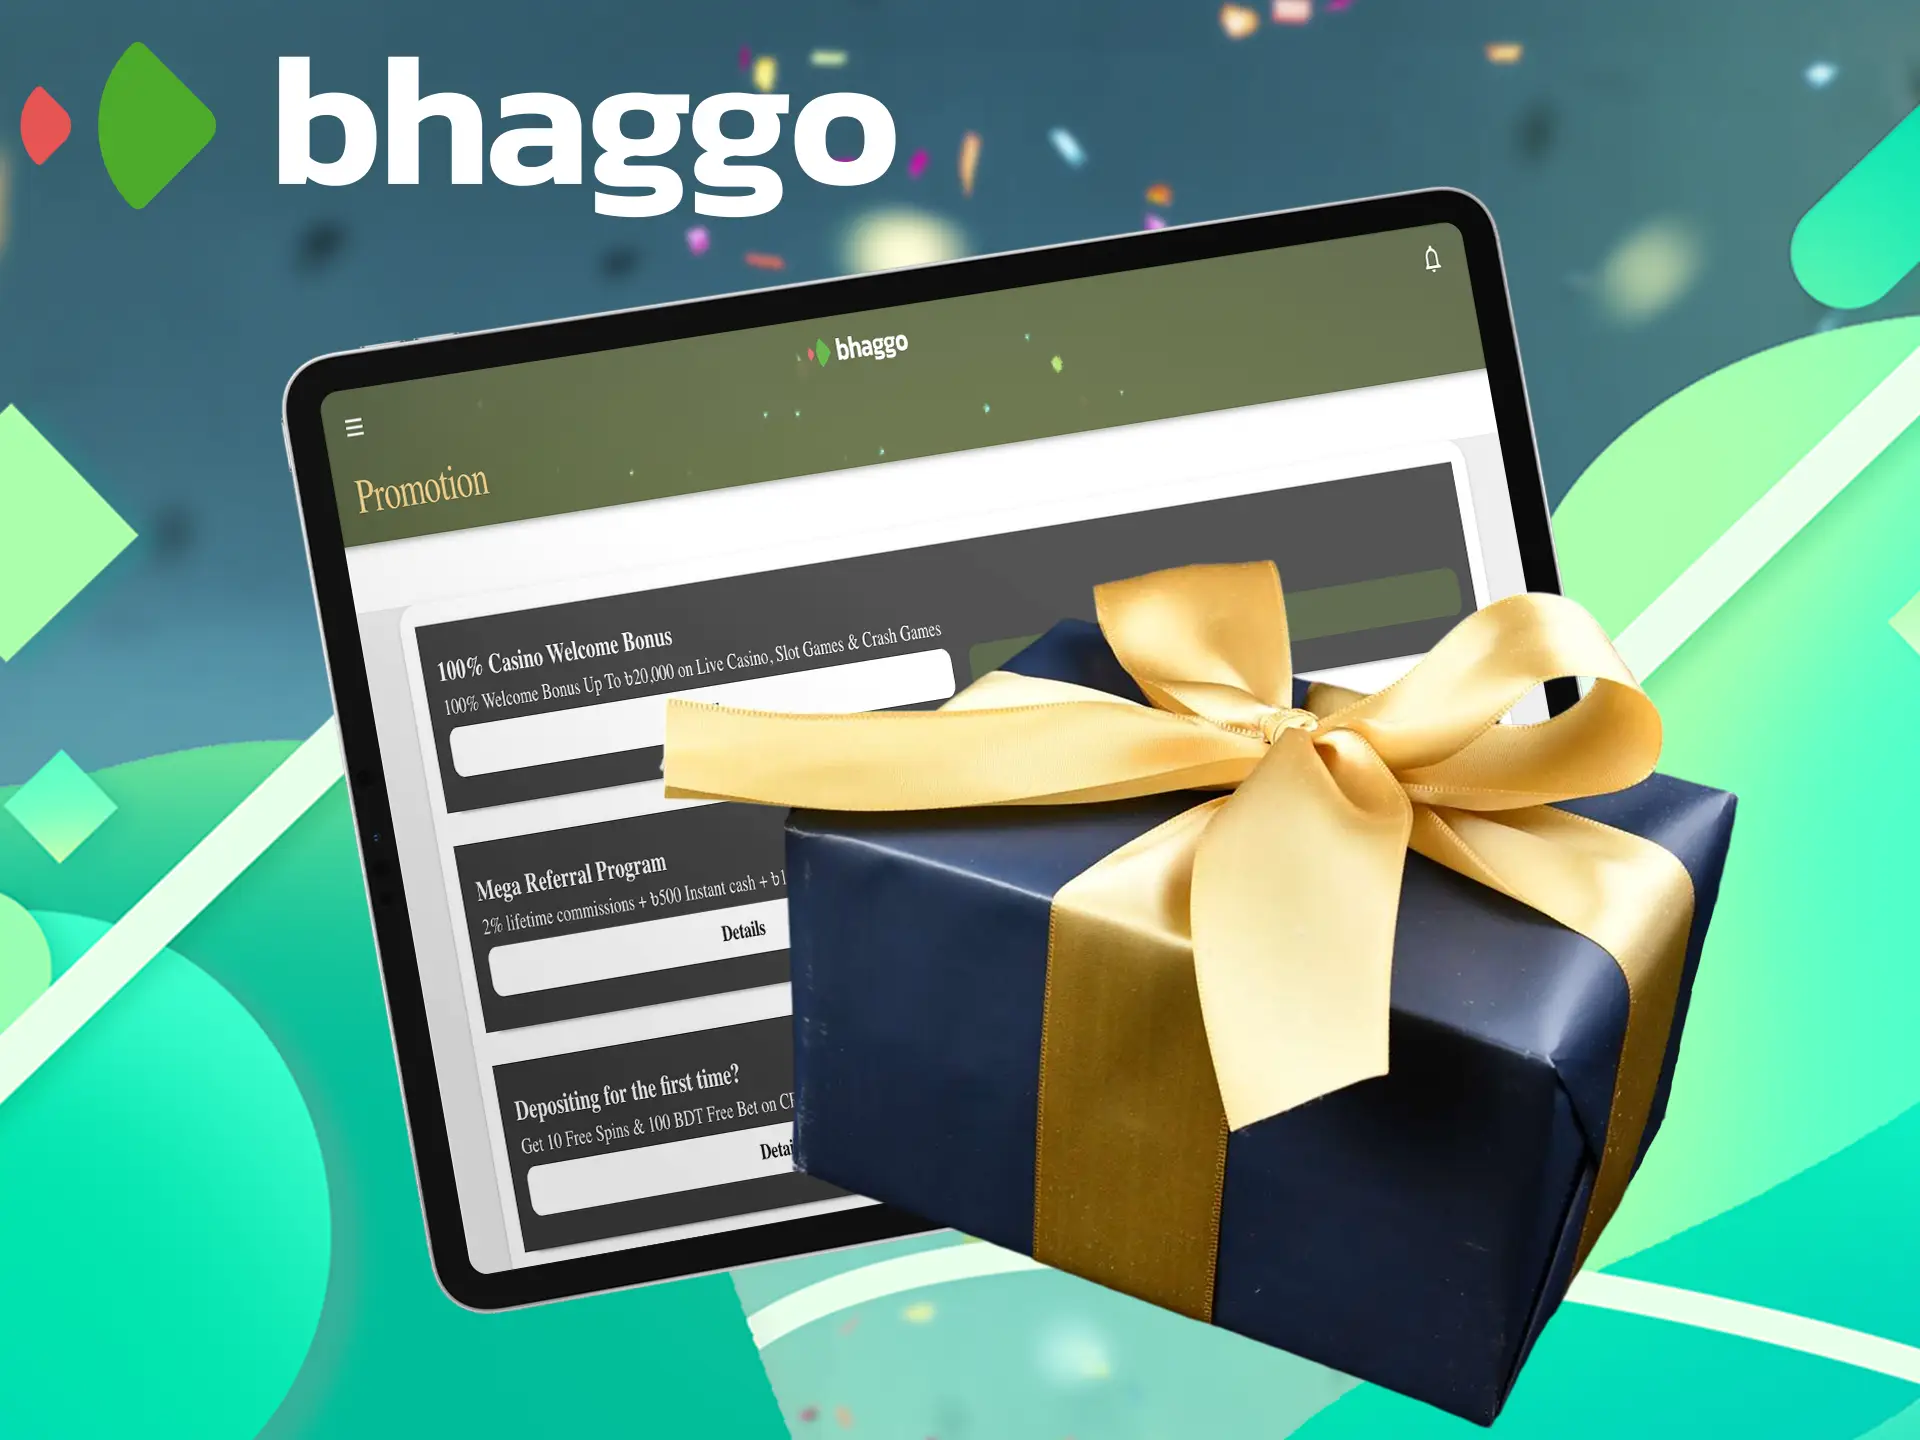 New users will receive a nice compliment from Bhaggo for creating an account, it can be used in both casino and sports betting.